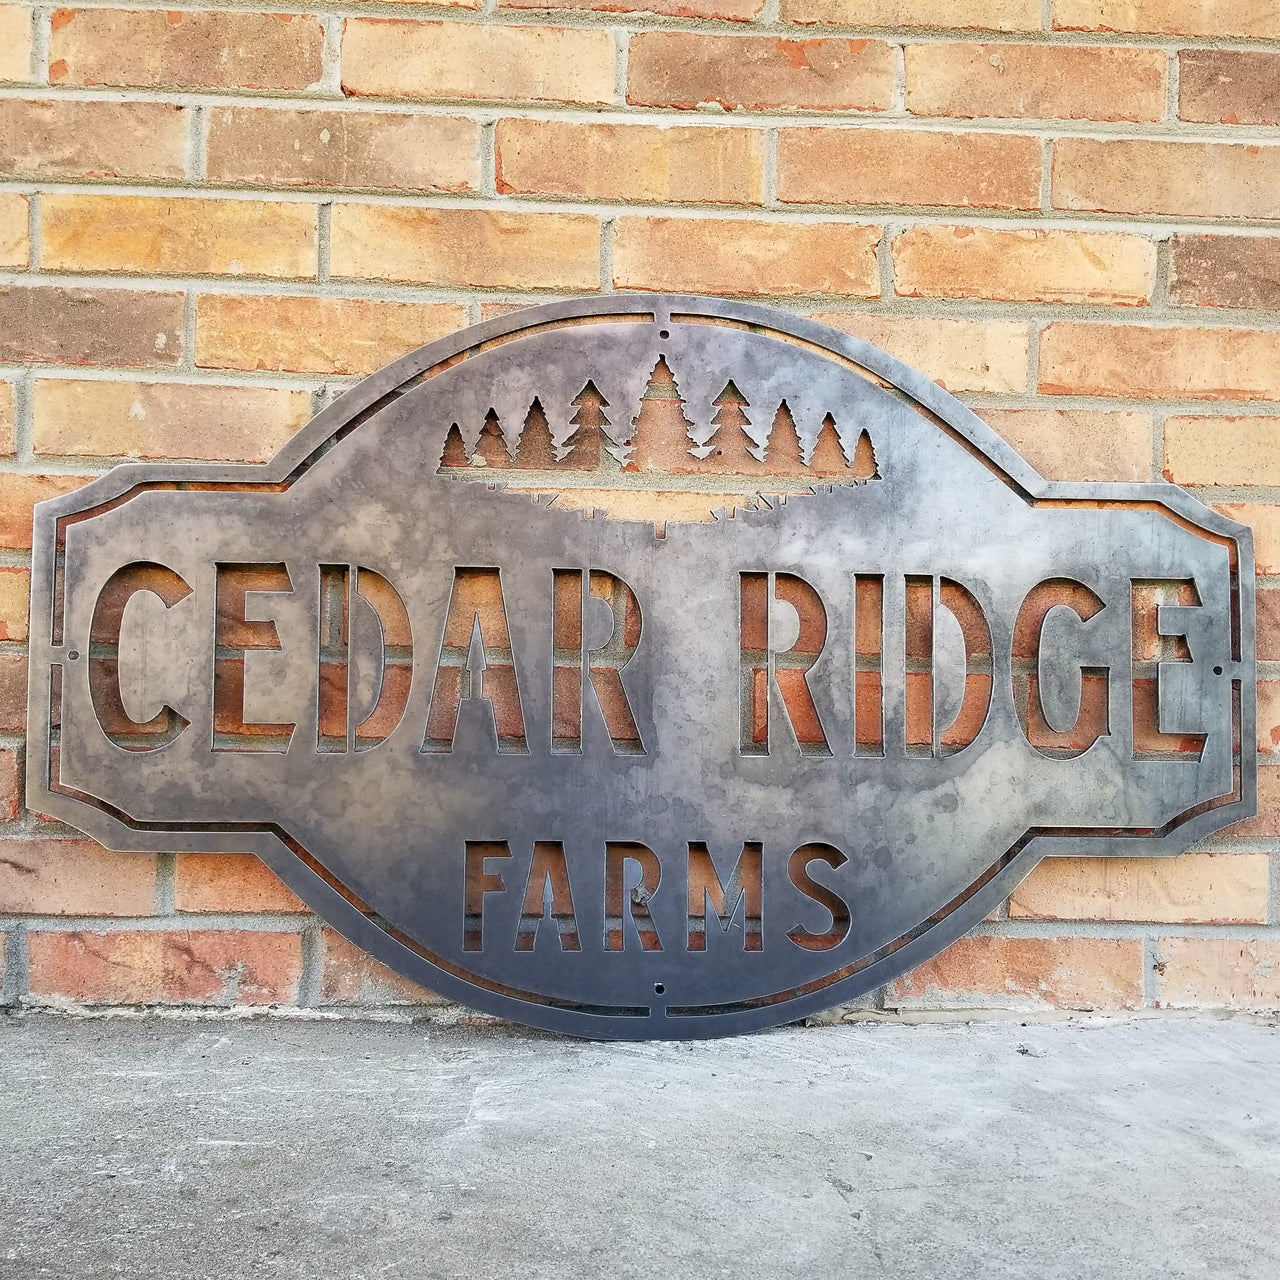 This is a rustic metal sign showcasing an image of trees at the top. The sign reads, "Cedar Ridge Farms".